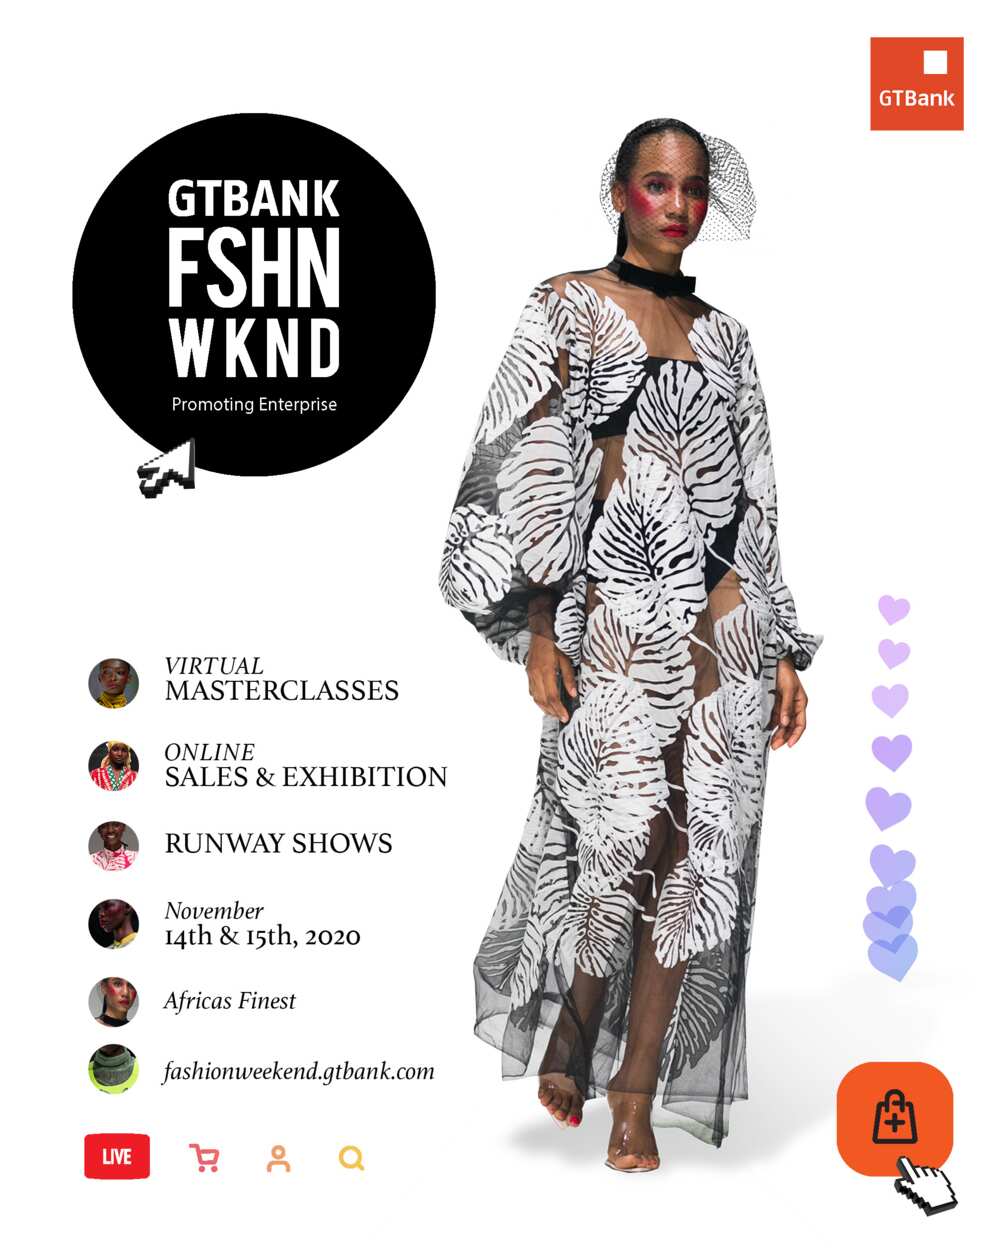 GTBank Fashion Weekend returns for the 5th year, set to hold Nov 14-15